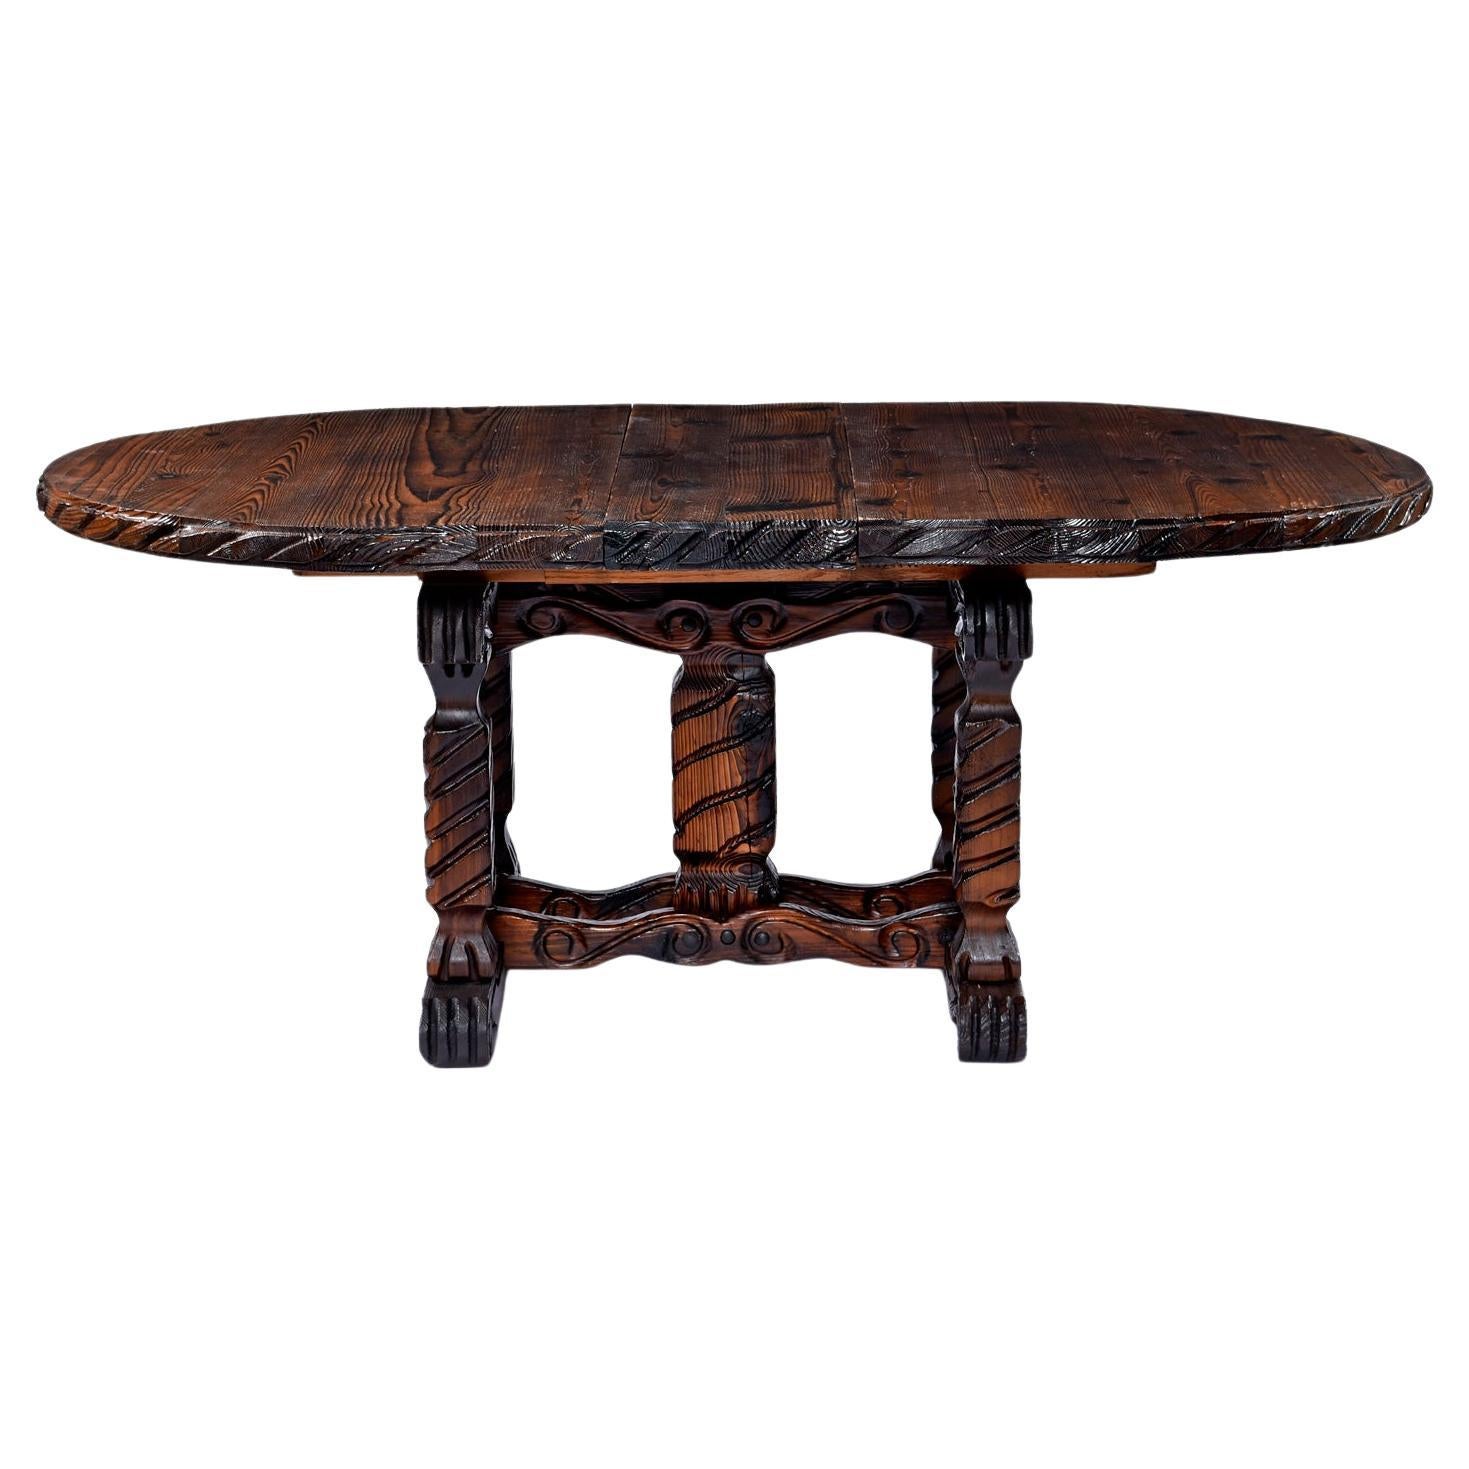 Vintage Tiki Style Witco Dining Table With Leaf by William Westenhaver